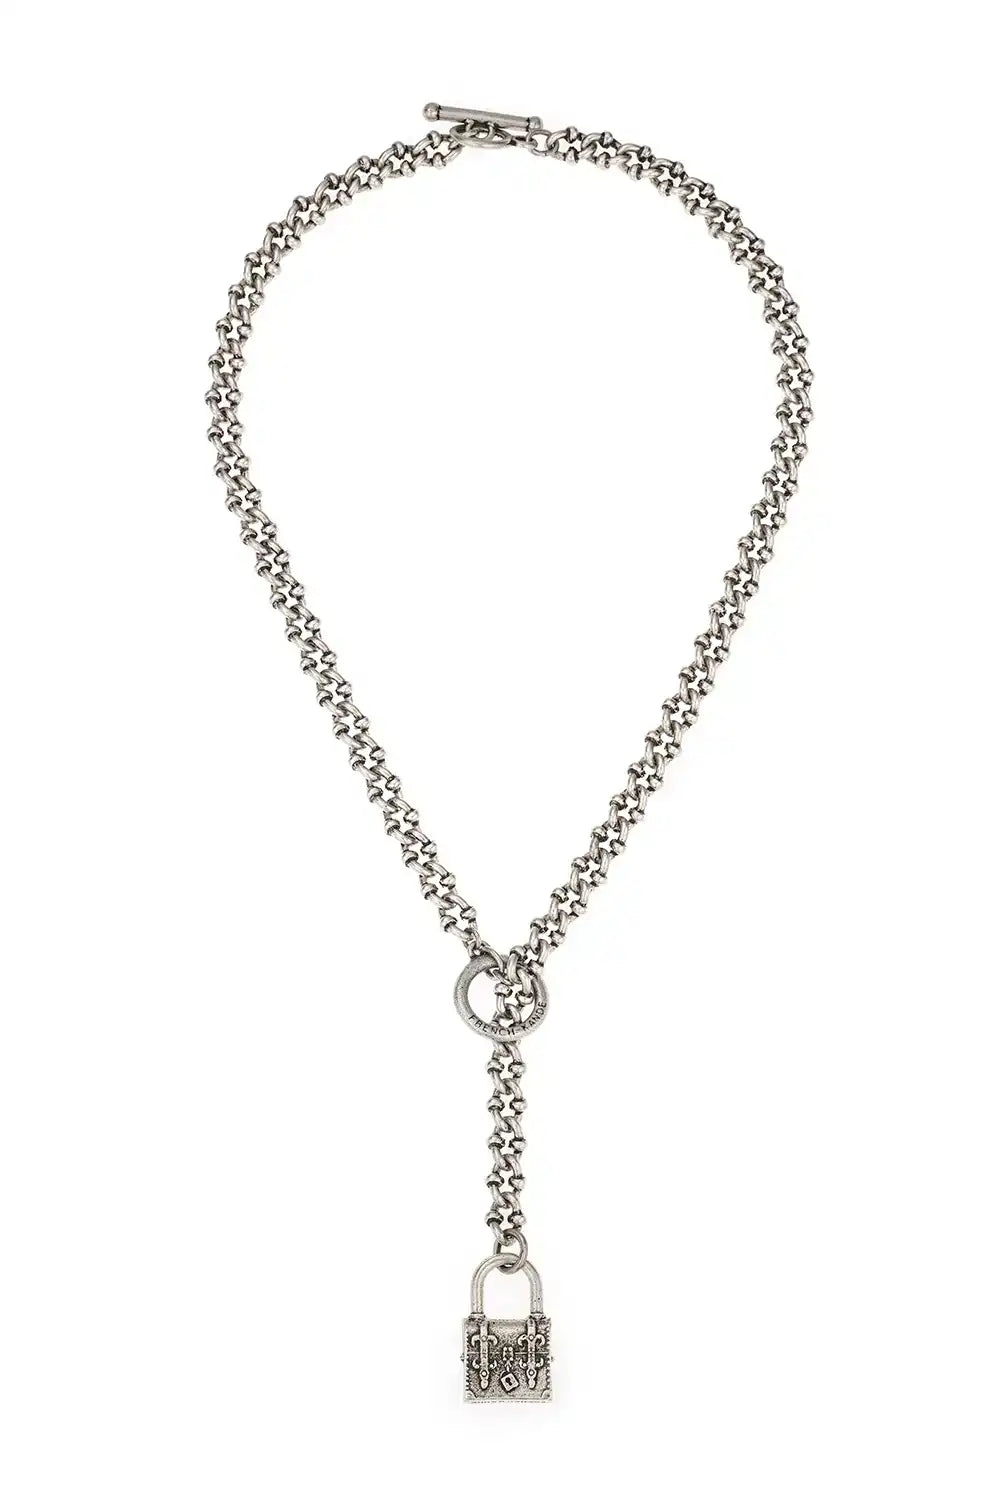 The Noele Necklace 16.5"